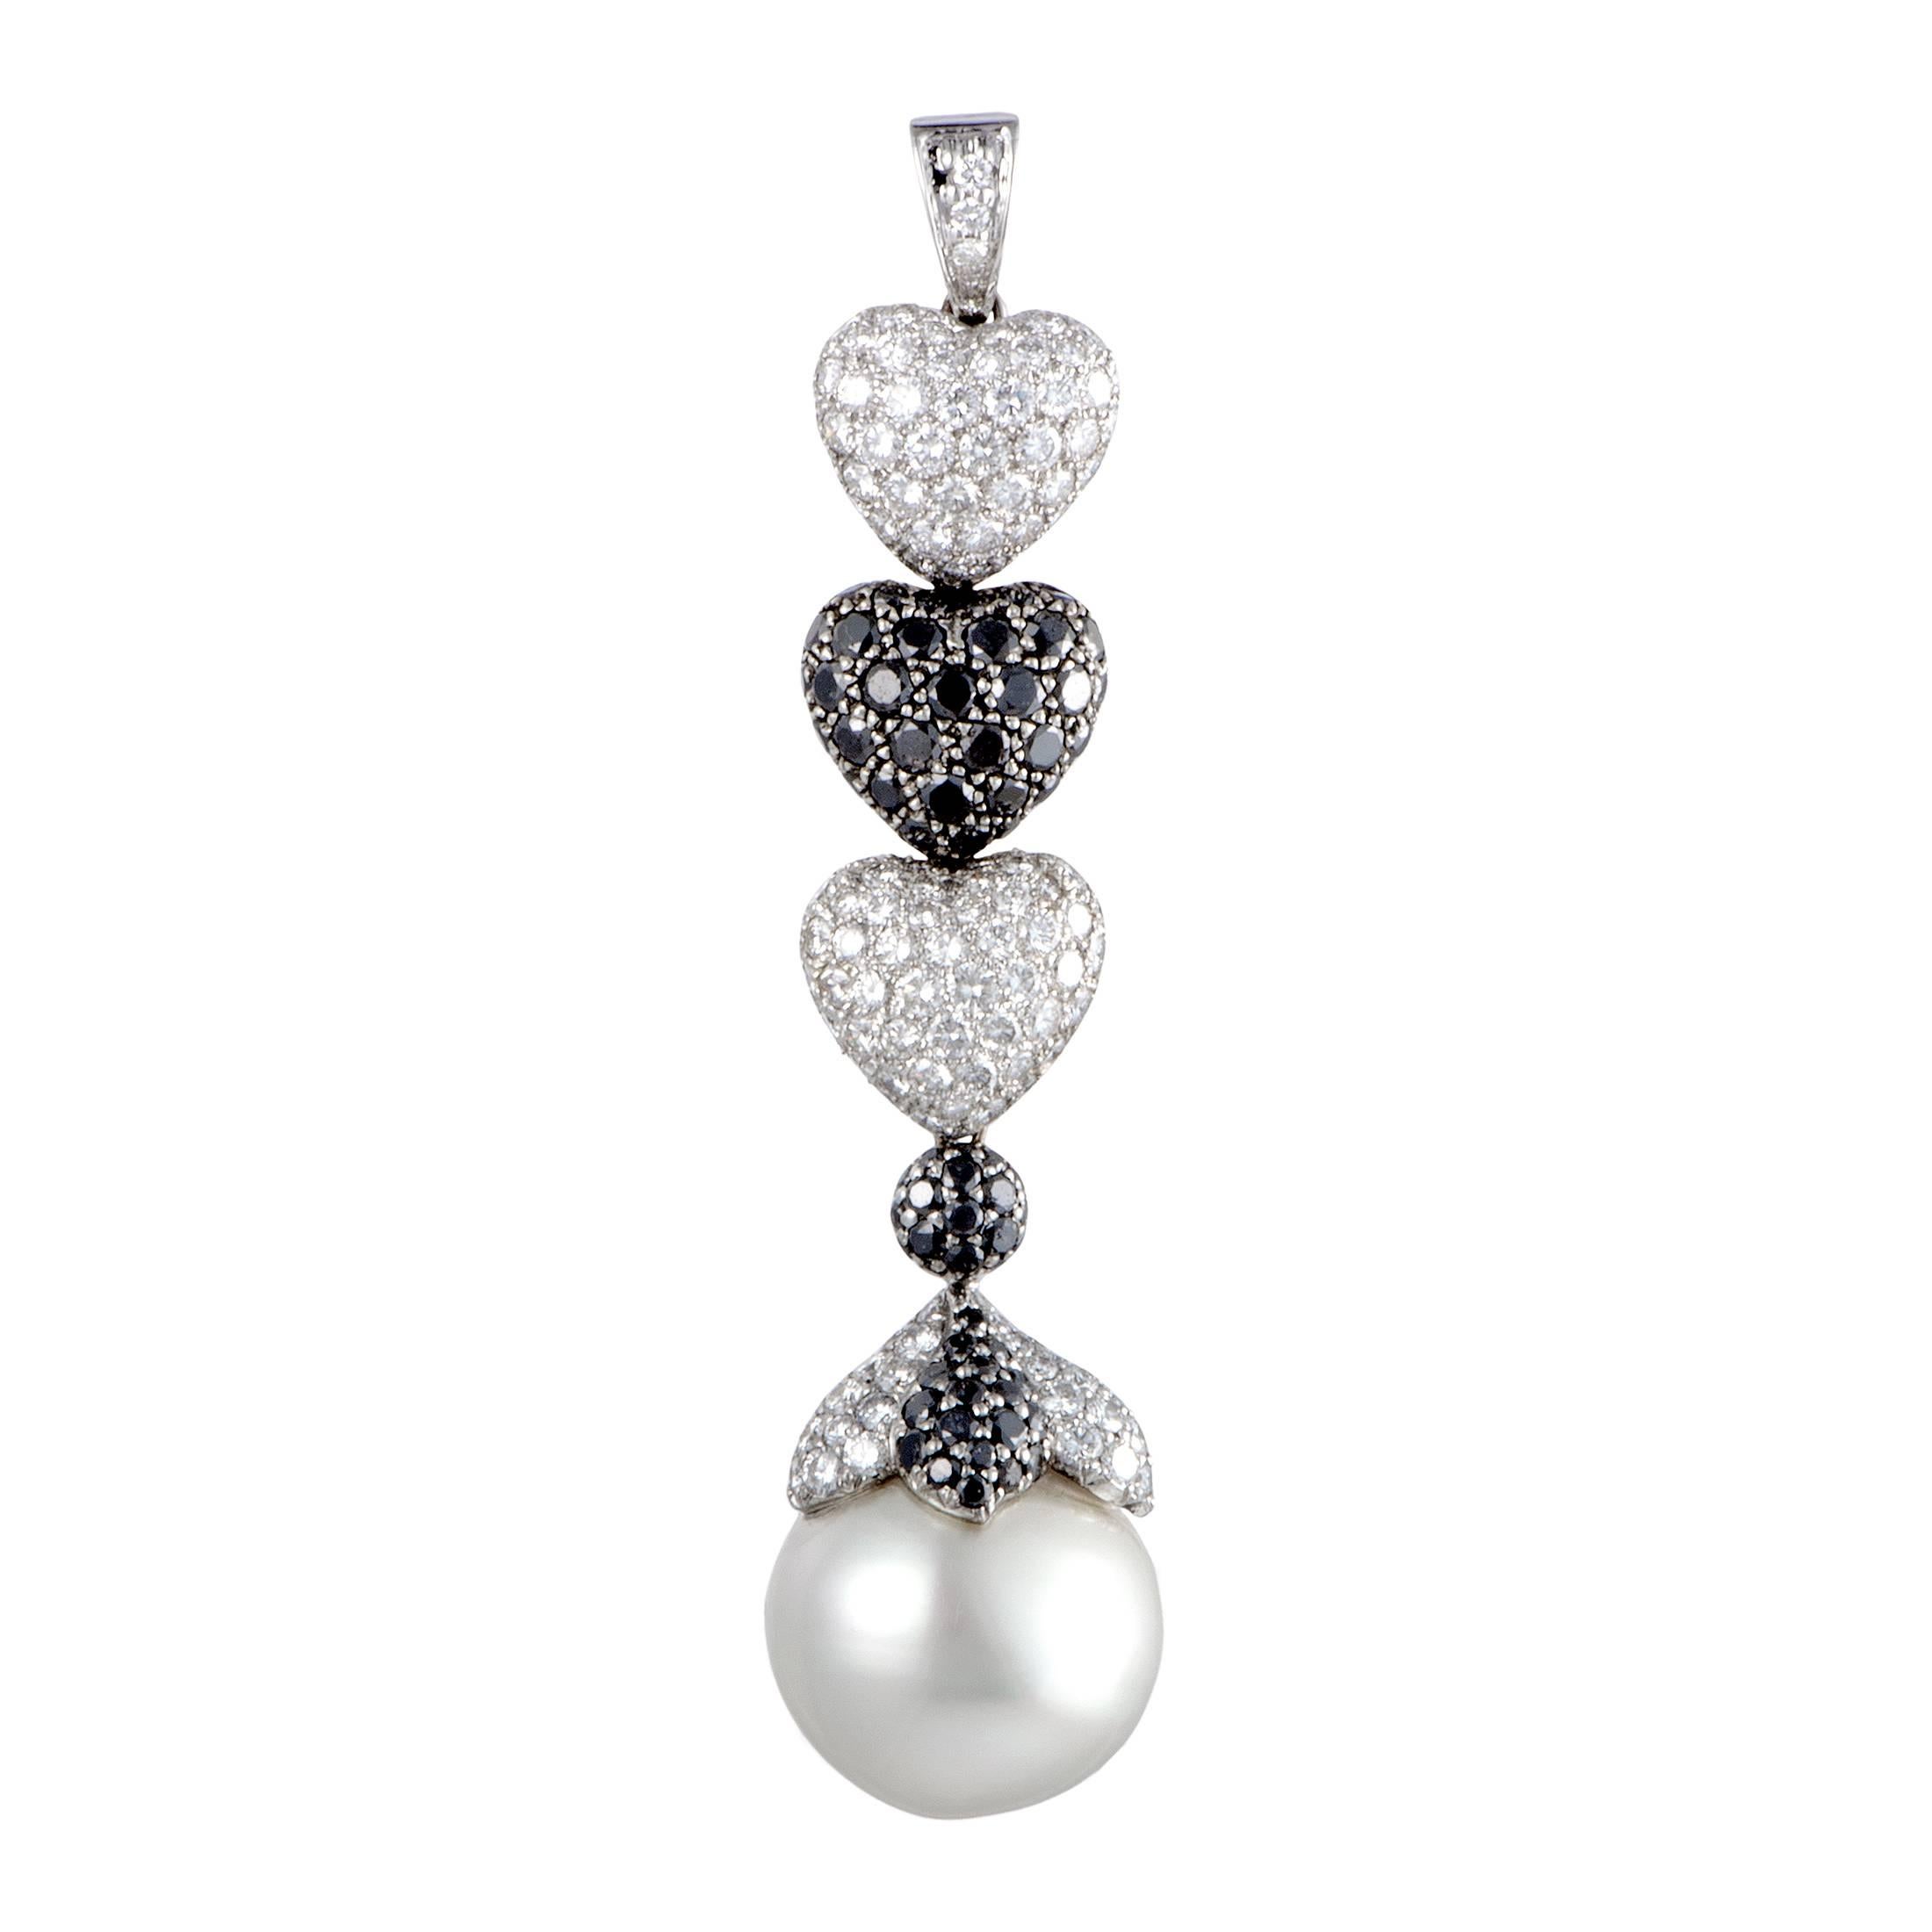 This stellar jewelry set is beautifully crafted by de Grisogono in shimmering 18K white gold. It includes a gorgeous pendant with three layers of hearts, embellished in dazzling white diamonds, classy black diamonds, and an elegant 19.33 mm pearl at